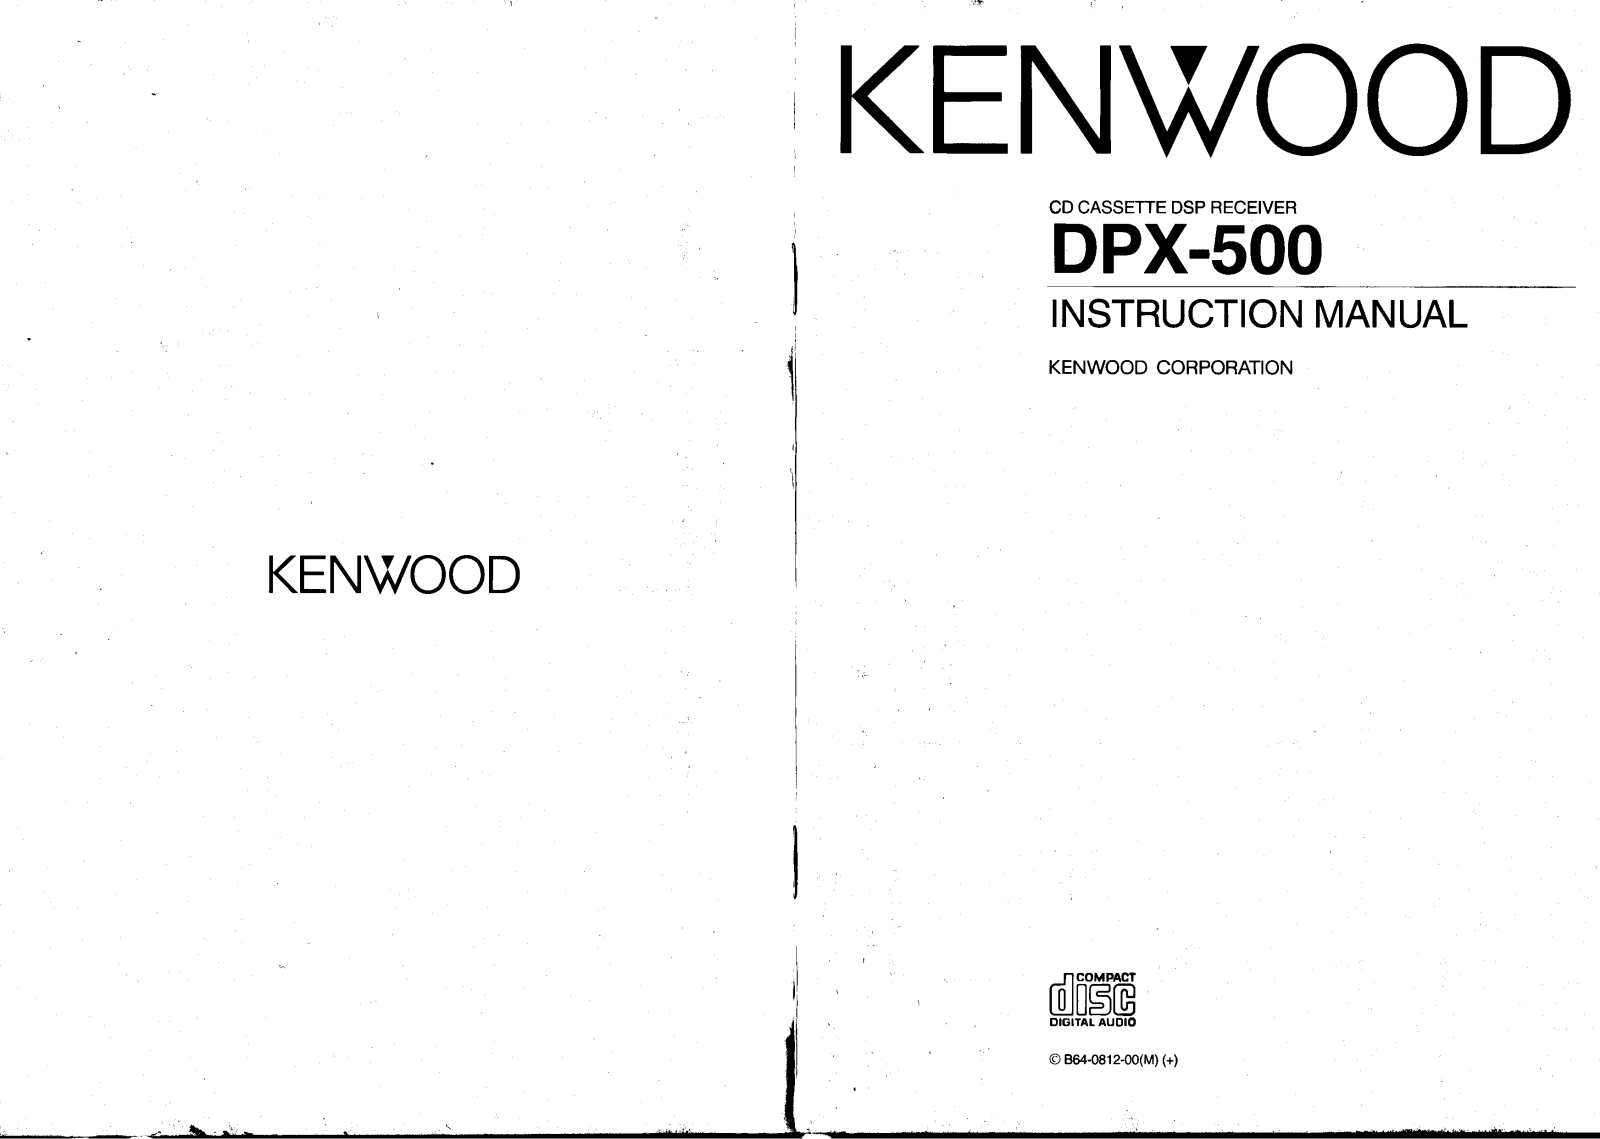 Kenwood DPX-500 Owner's Manual